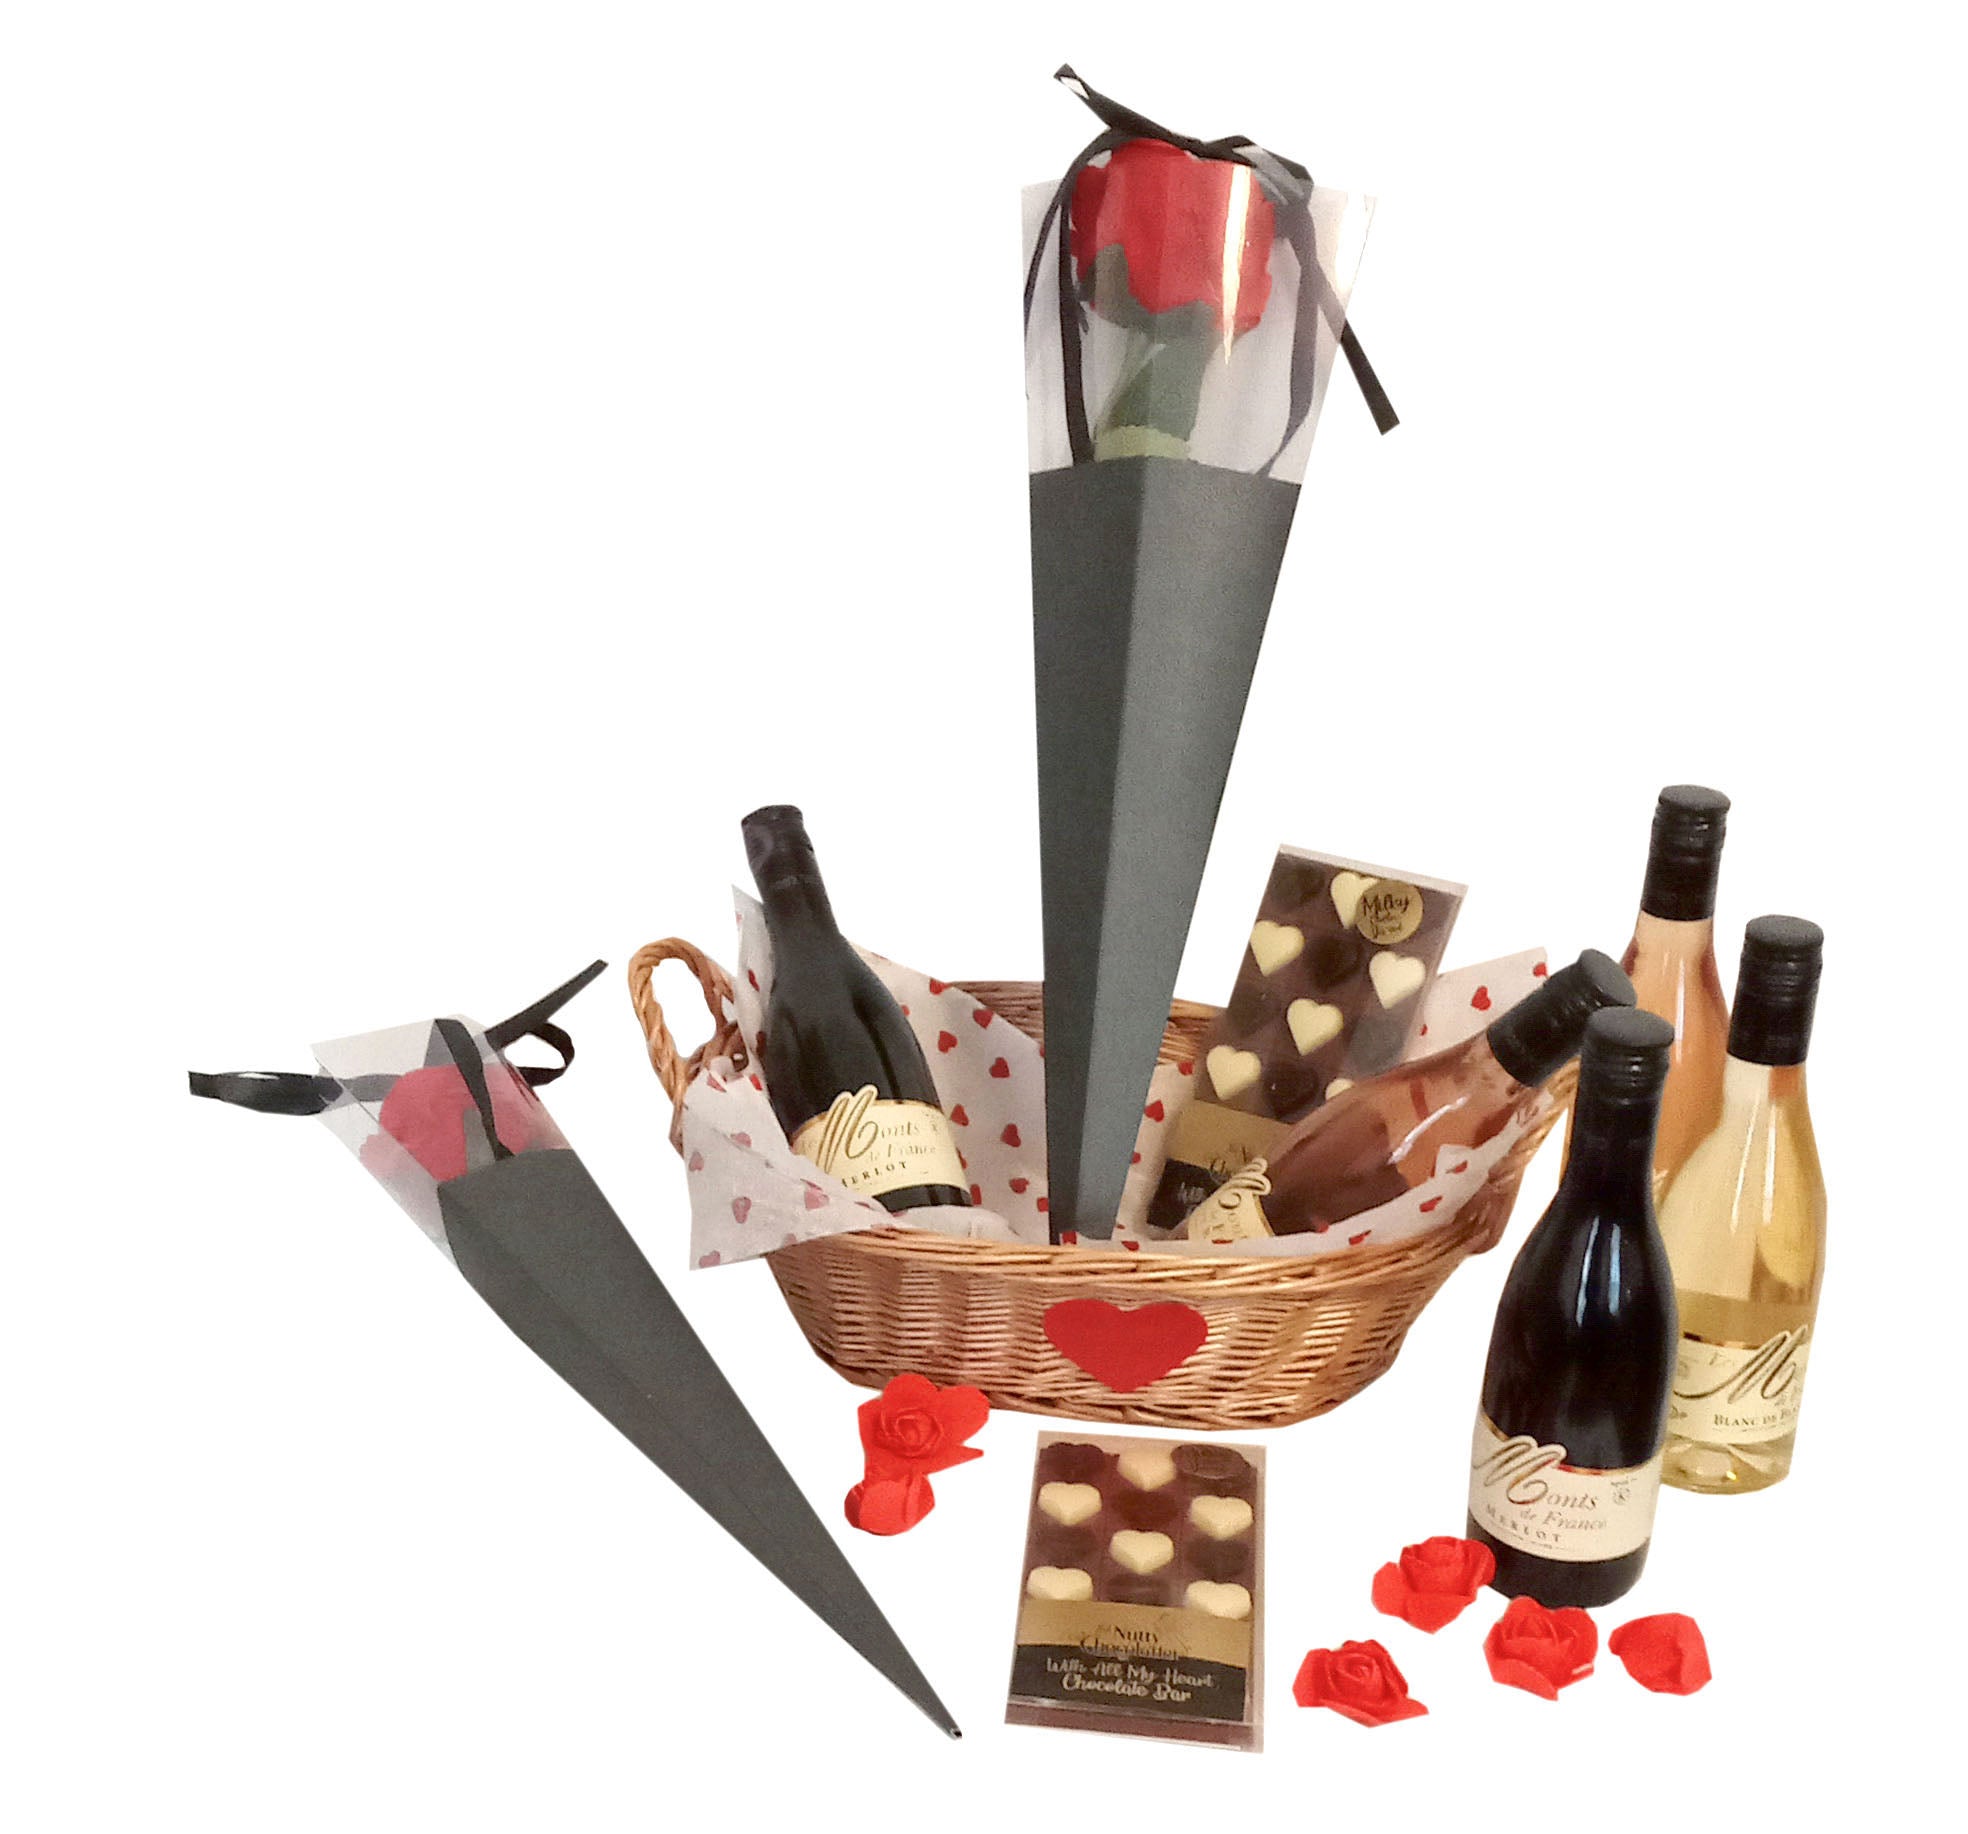 LOVE GIFT WITH CHOCOLATE HEARTS, FRENCH WINES AND A RED ROSE IN A GIFT BOX CONE. GIFT WRAPPED WITH RIBBONS AND BOWS.  DELIVERED THROUGHOUT THE UK. KOSHER